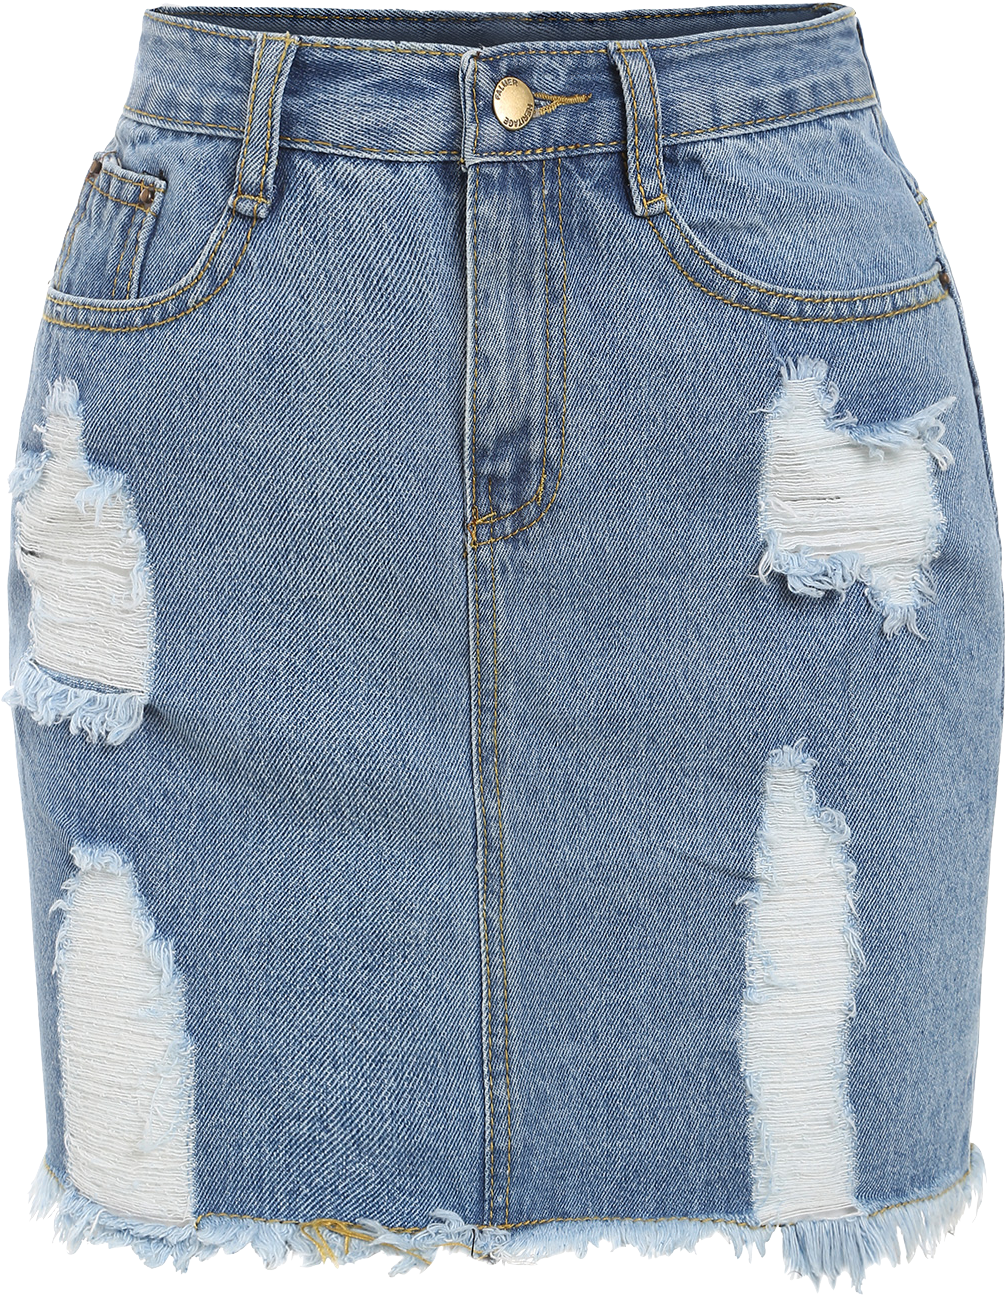 A Blue Jean Skirt With A White Patch